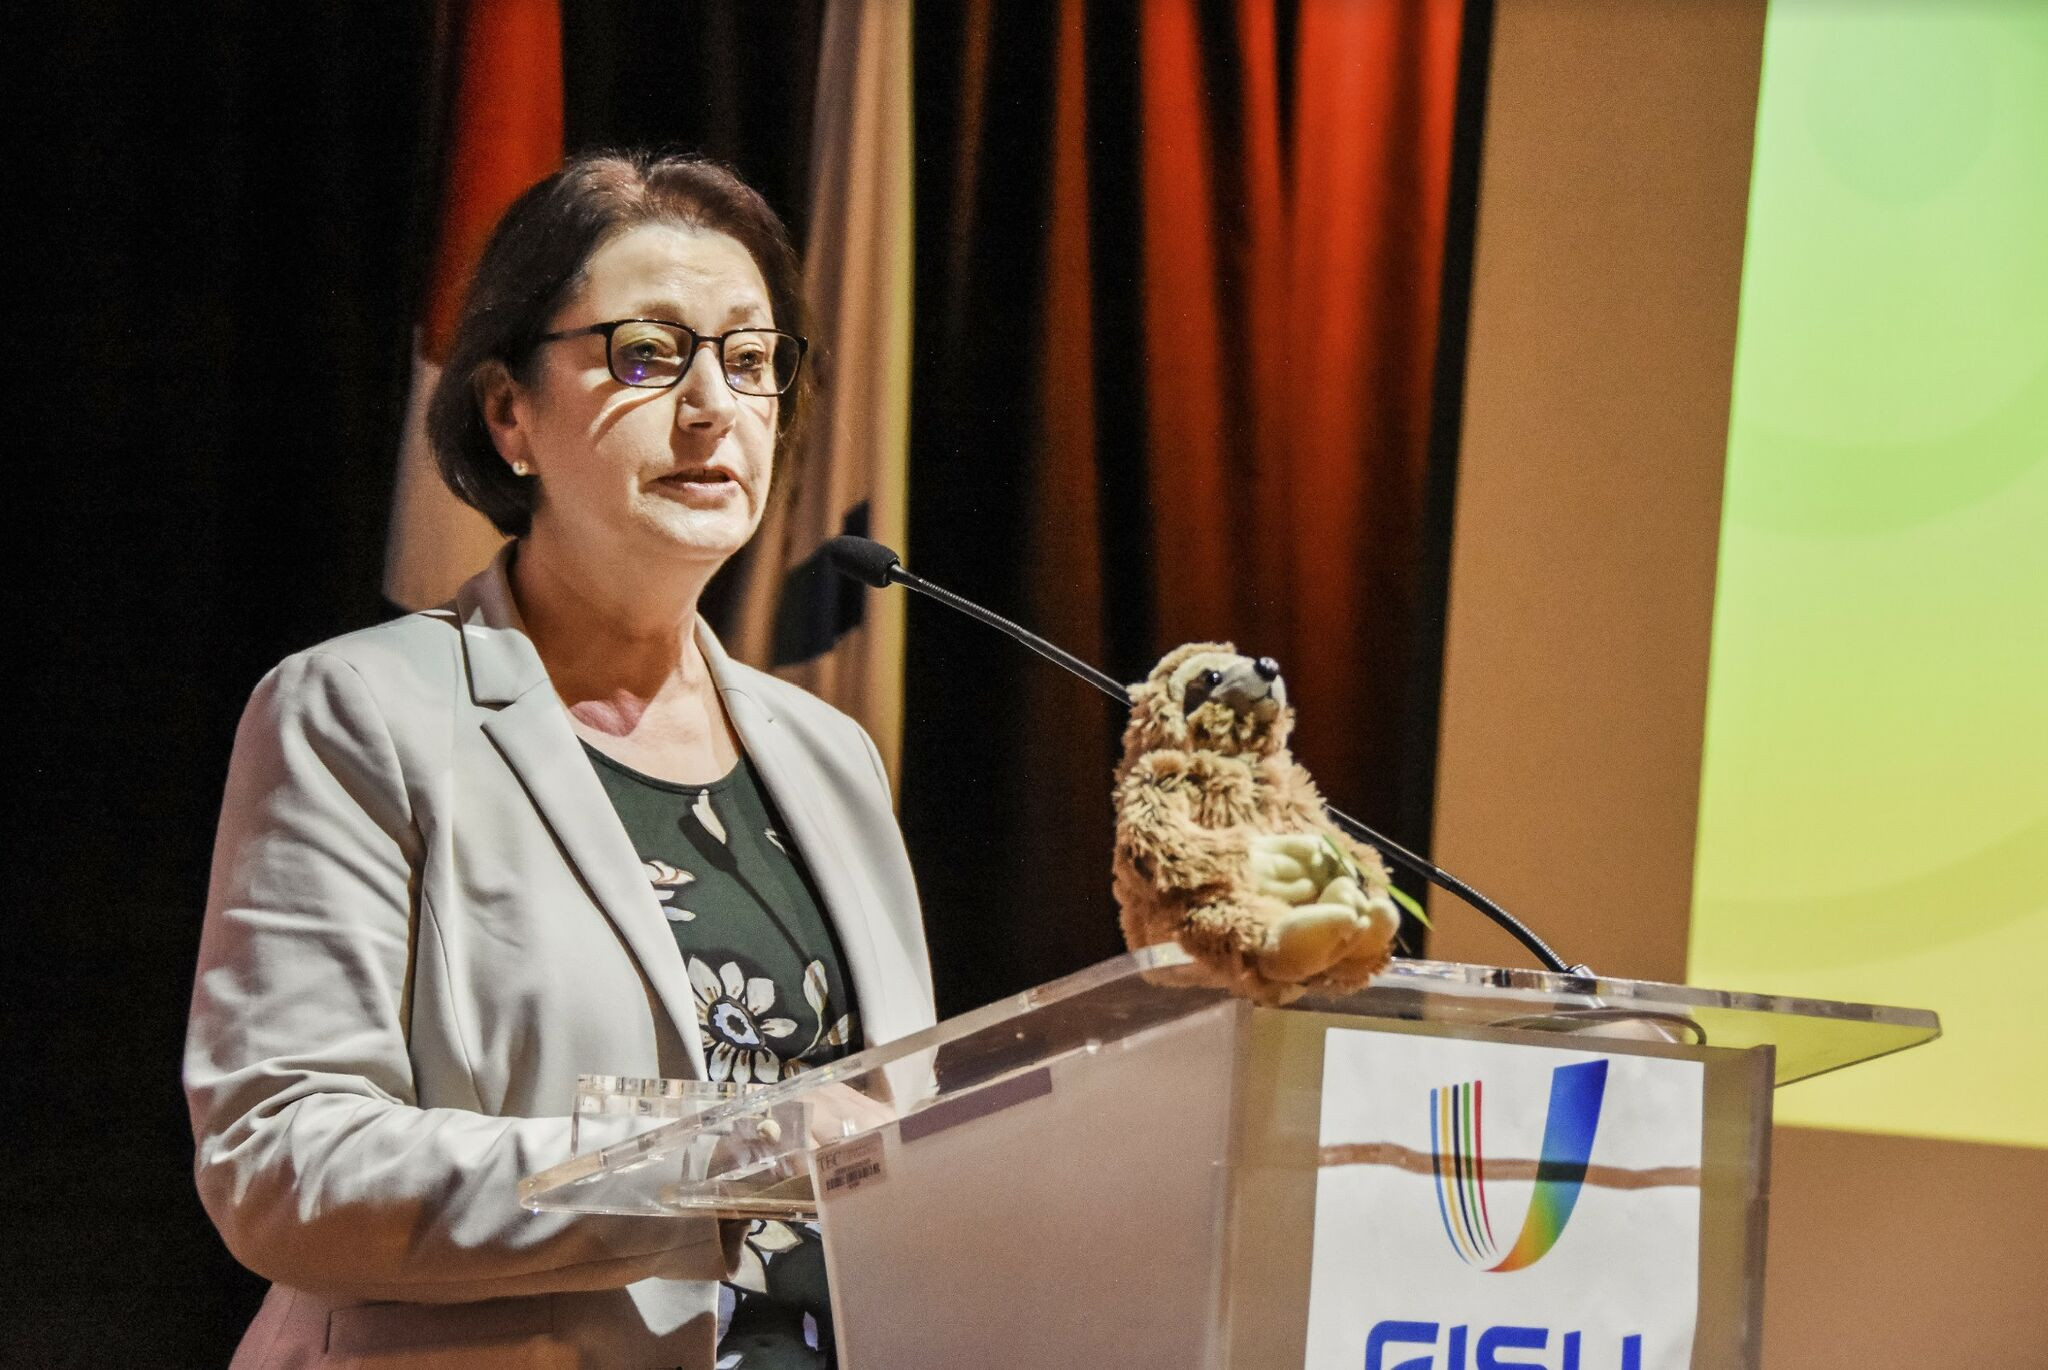 Verena Burk called sustainability "a topic of outstanding importance" ©FISU